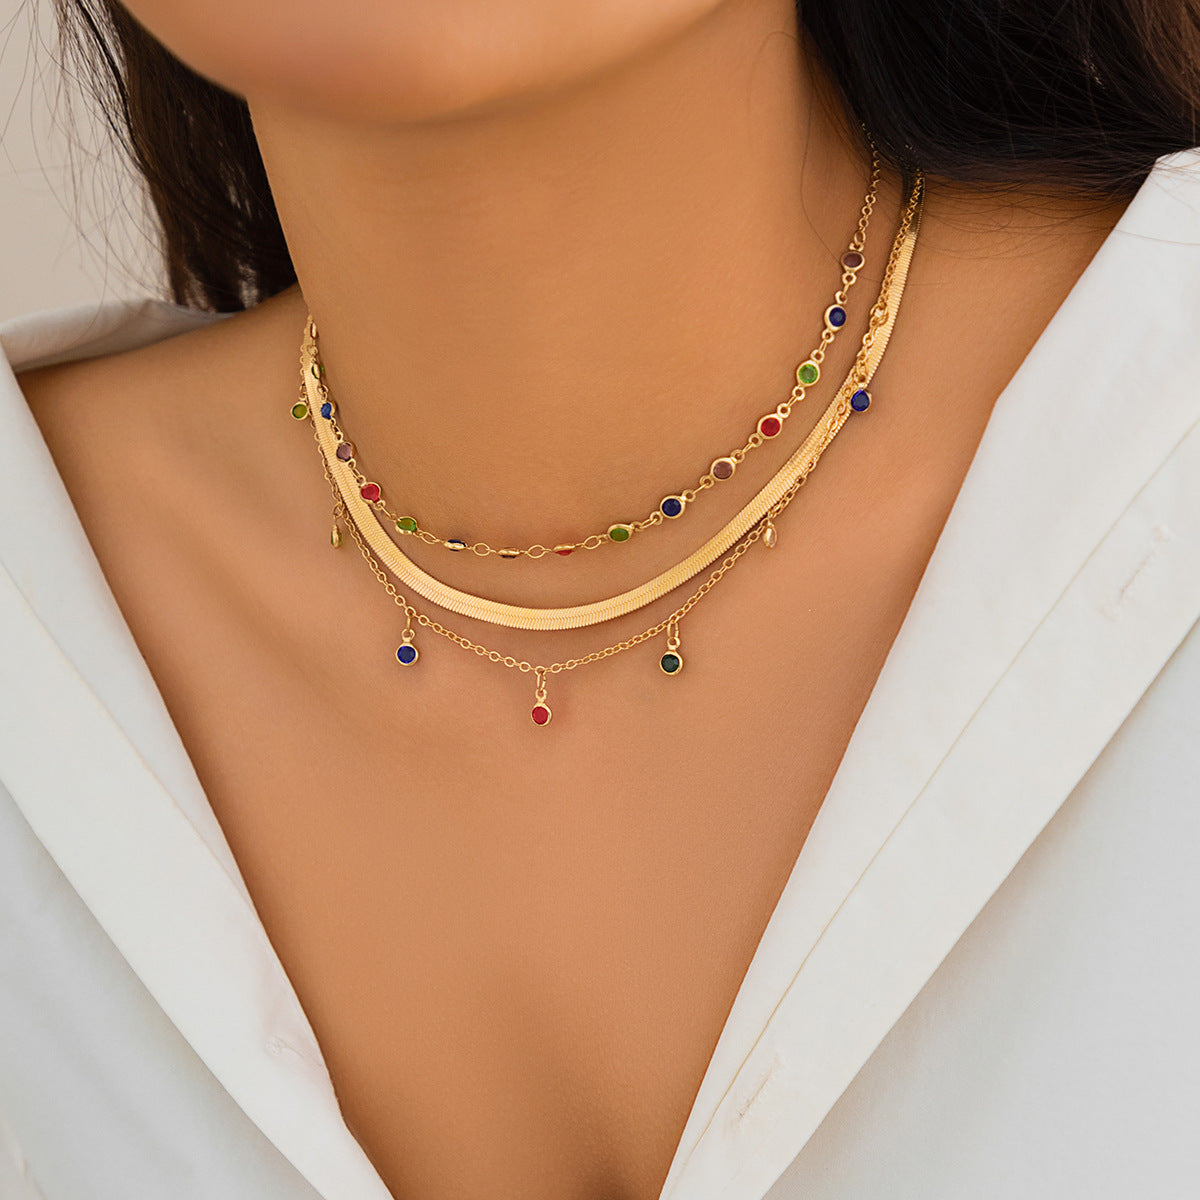 Spicy Girl Crystal Star Choker Necklace with Snake Bone Chain